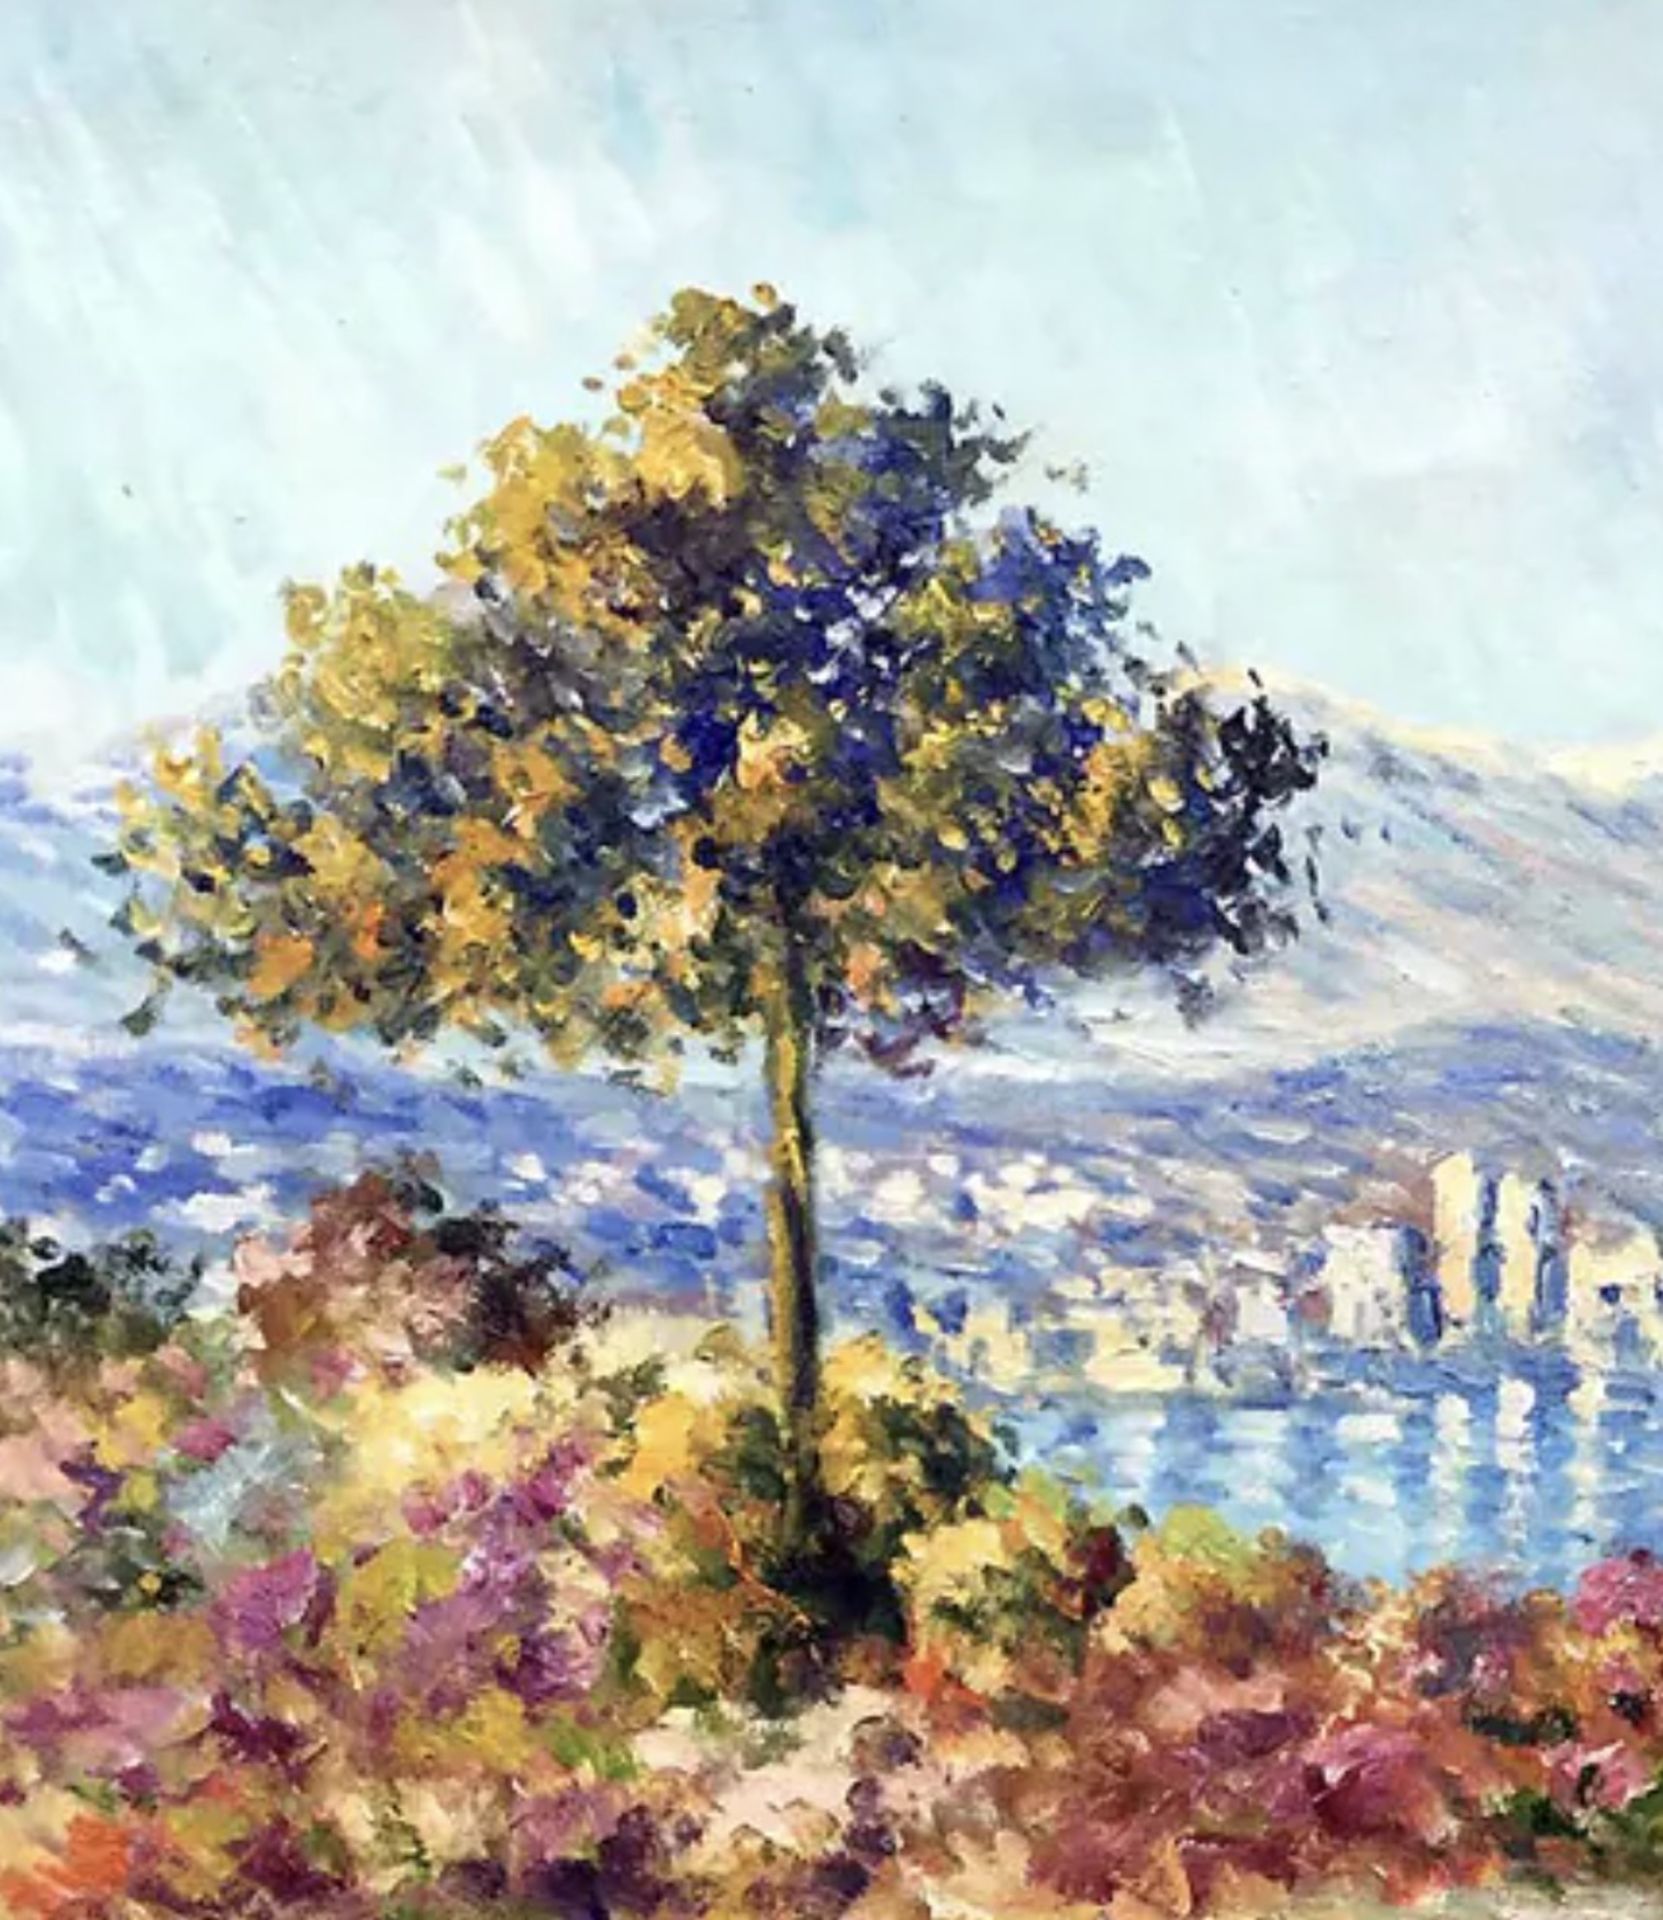 Claude Monet "Antibes, 1888" Oil Painting, After - Image 3 of 6